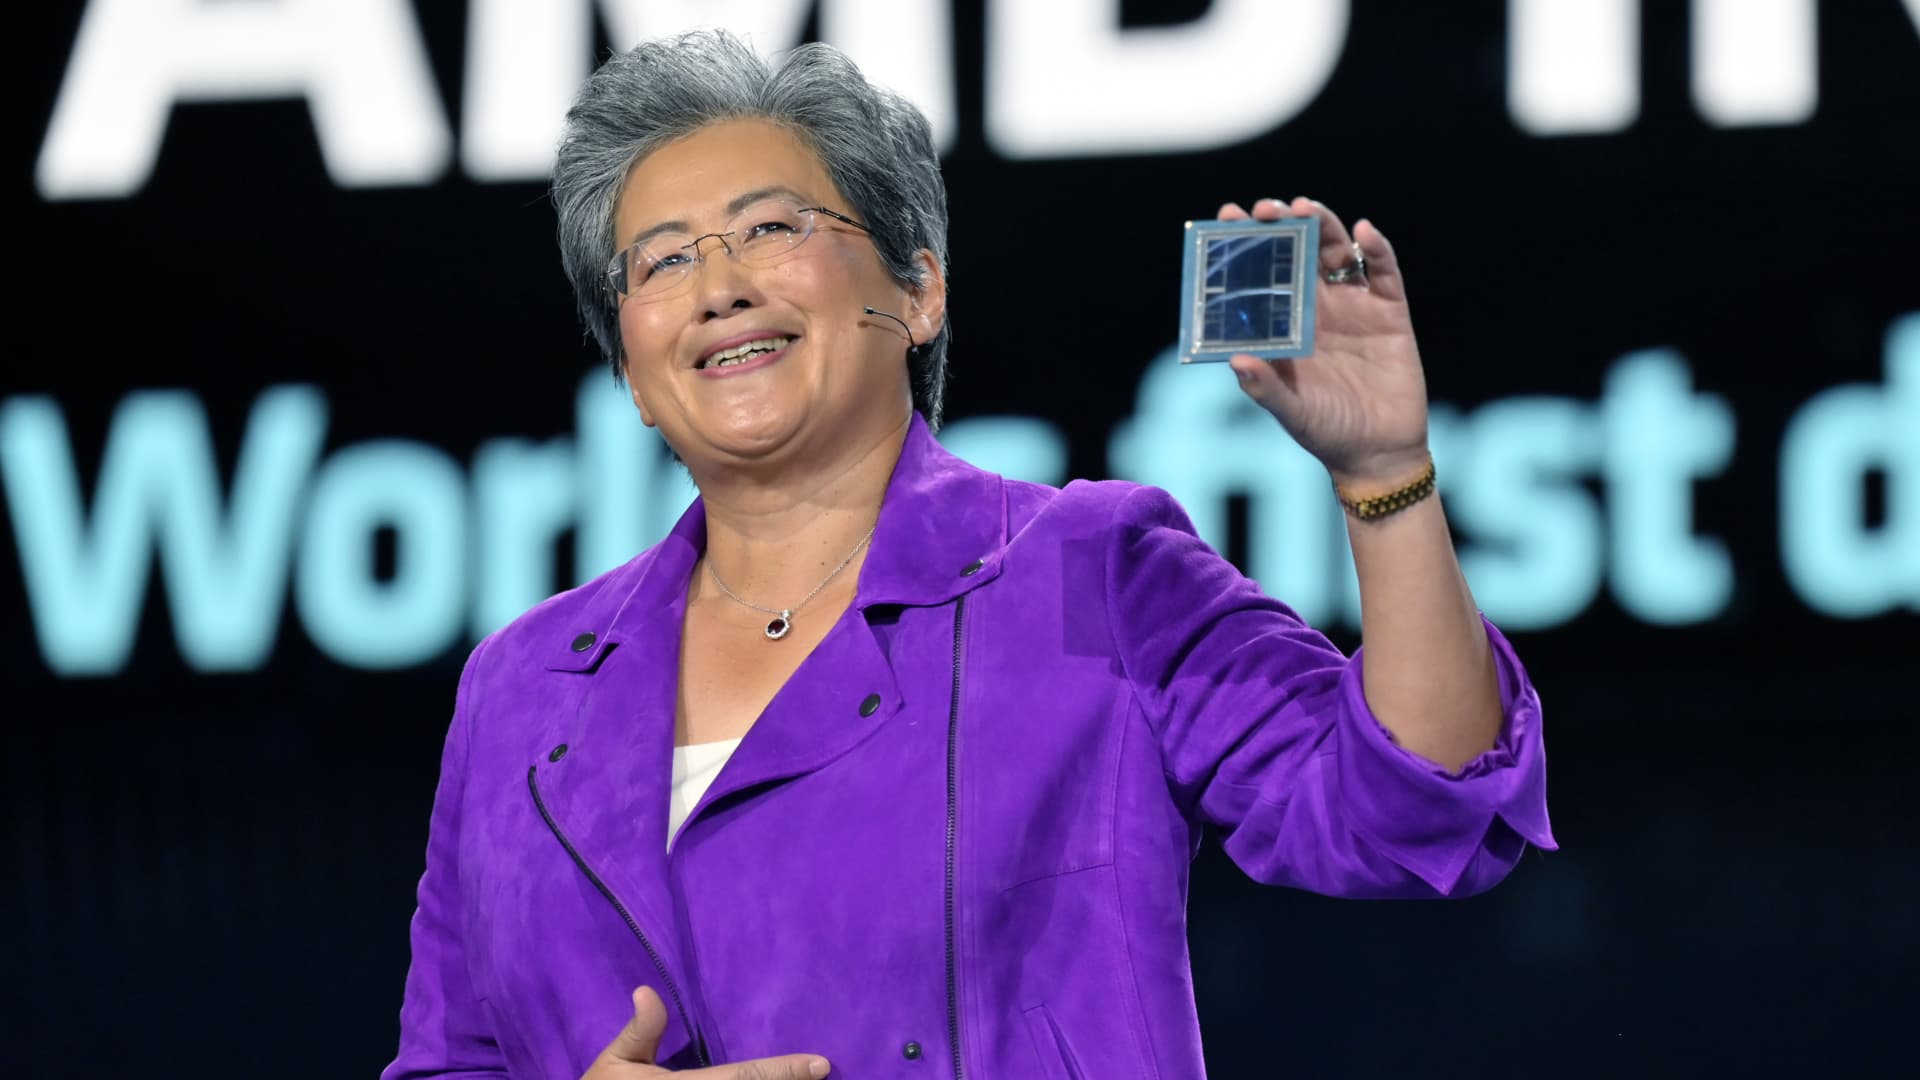 AMD's stock surge in past year leads analyst to a 'heck if we know' rating